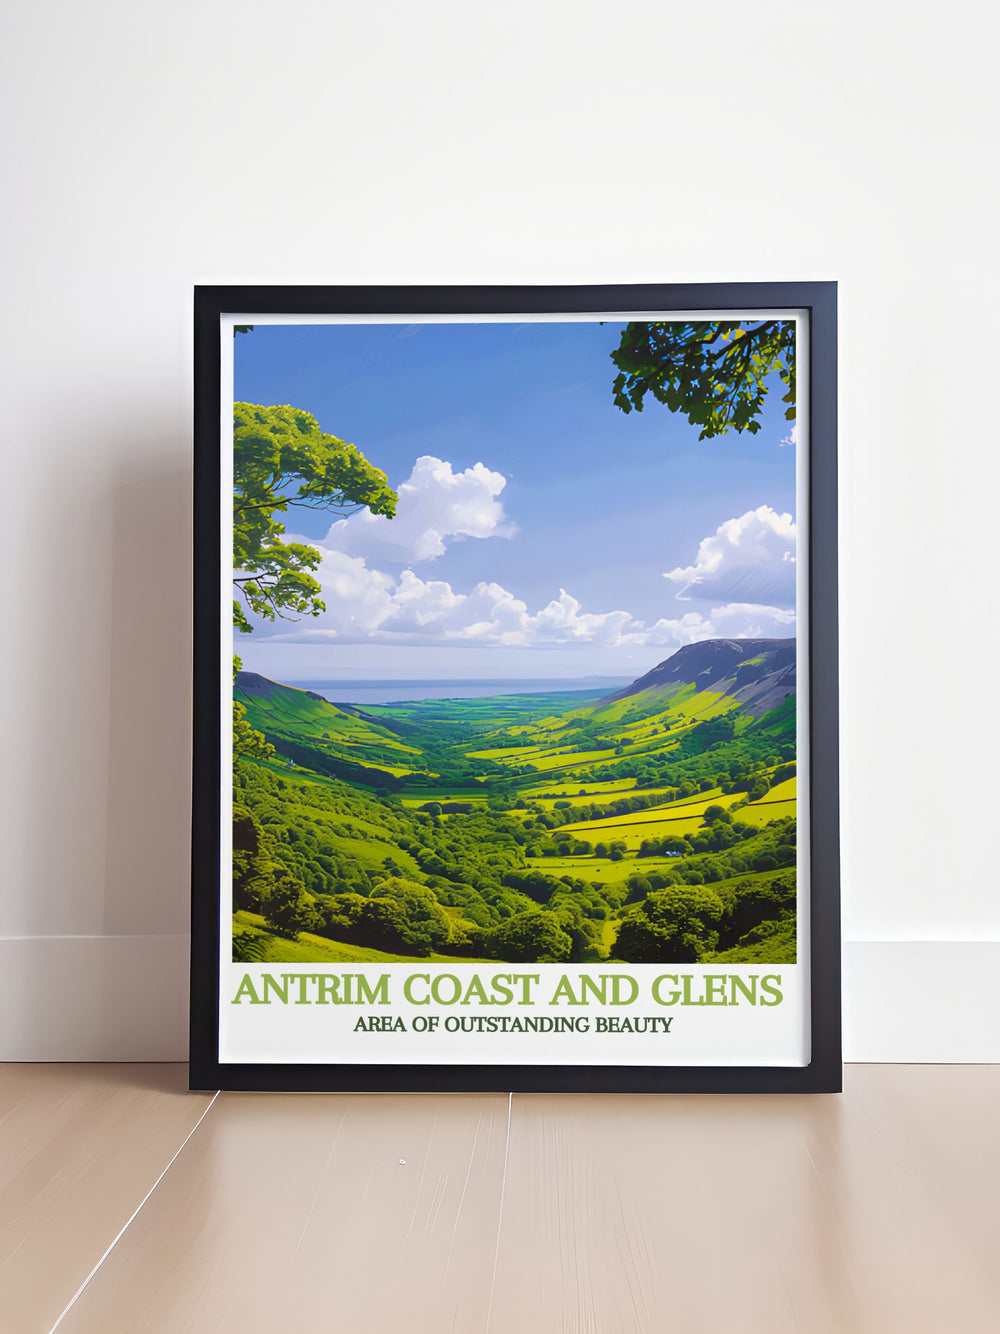 Framed art of the Antrim Coast, capturing the dramatic cliffs and deep green fields of Northern Ireland.